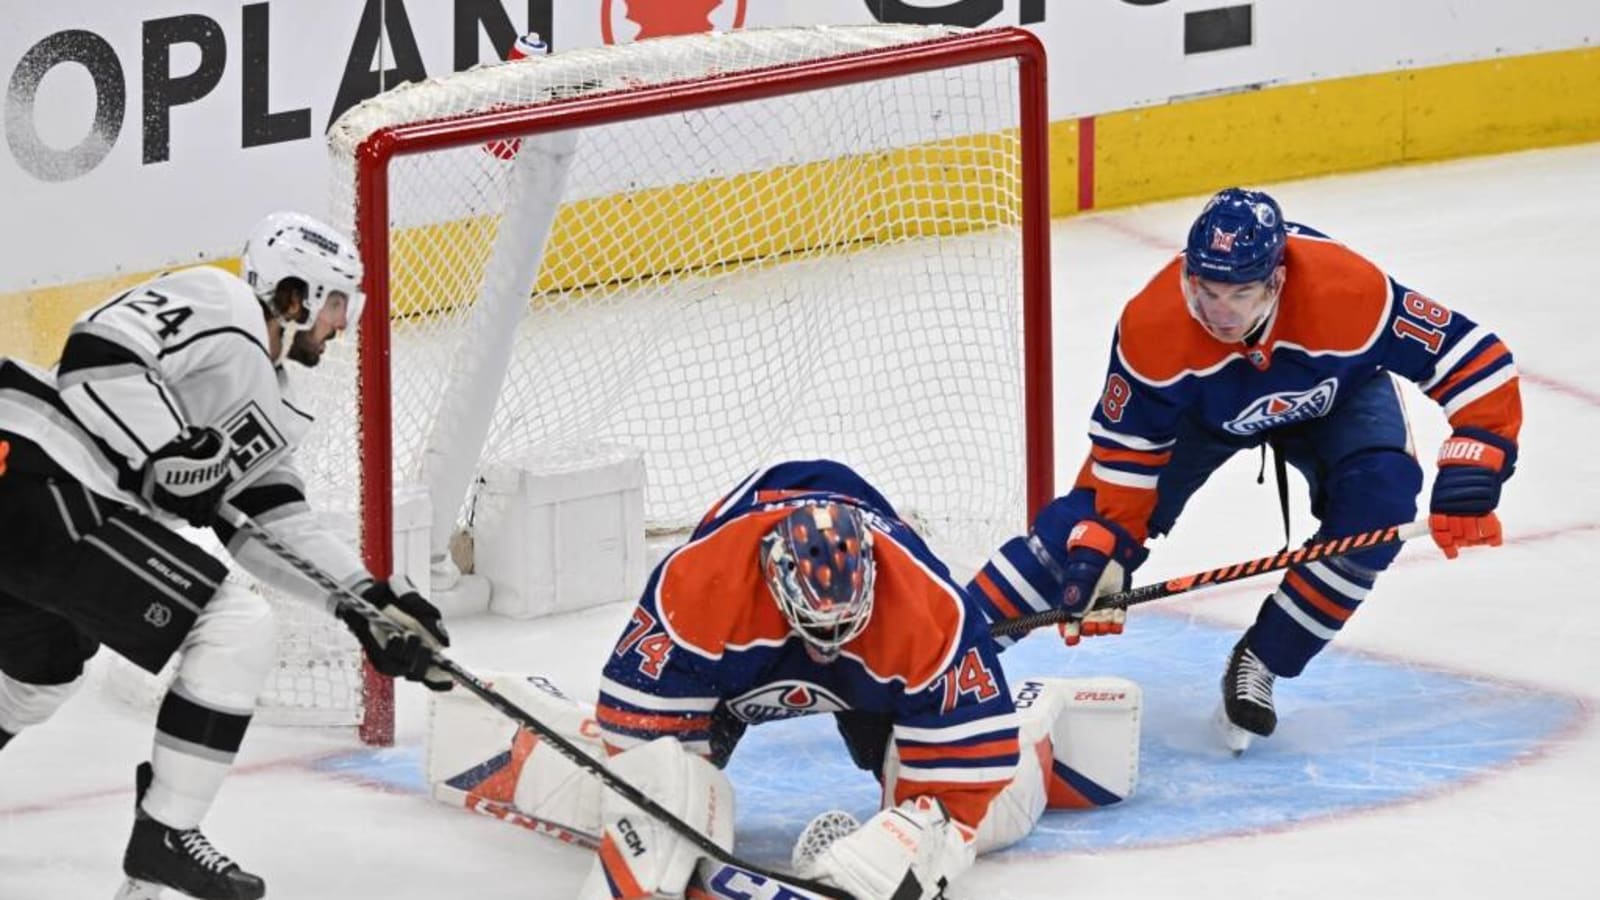 Watch LA Kings vs. Edmonton Oilers in the playoffs first round (game 2